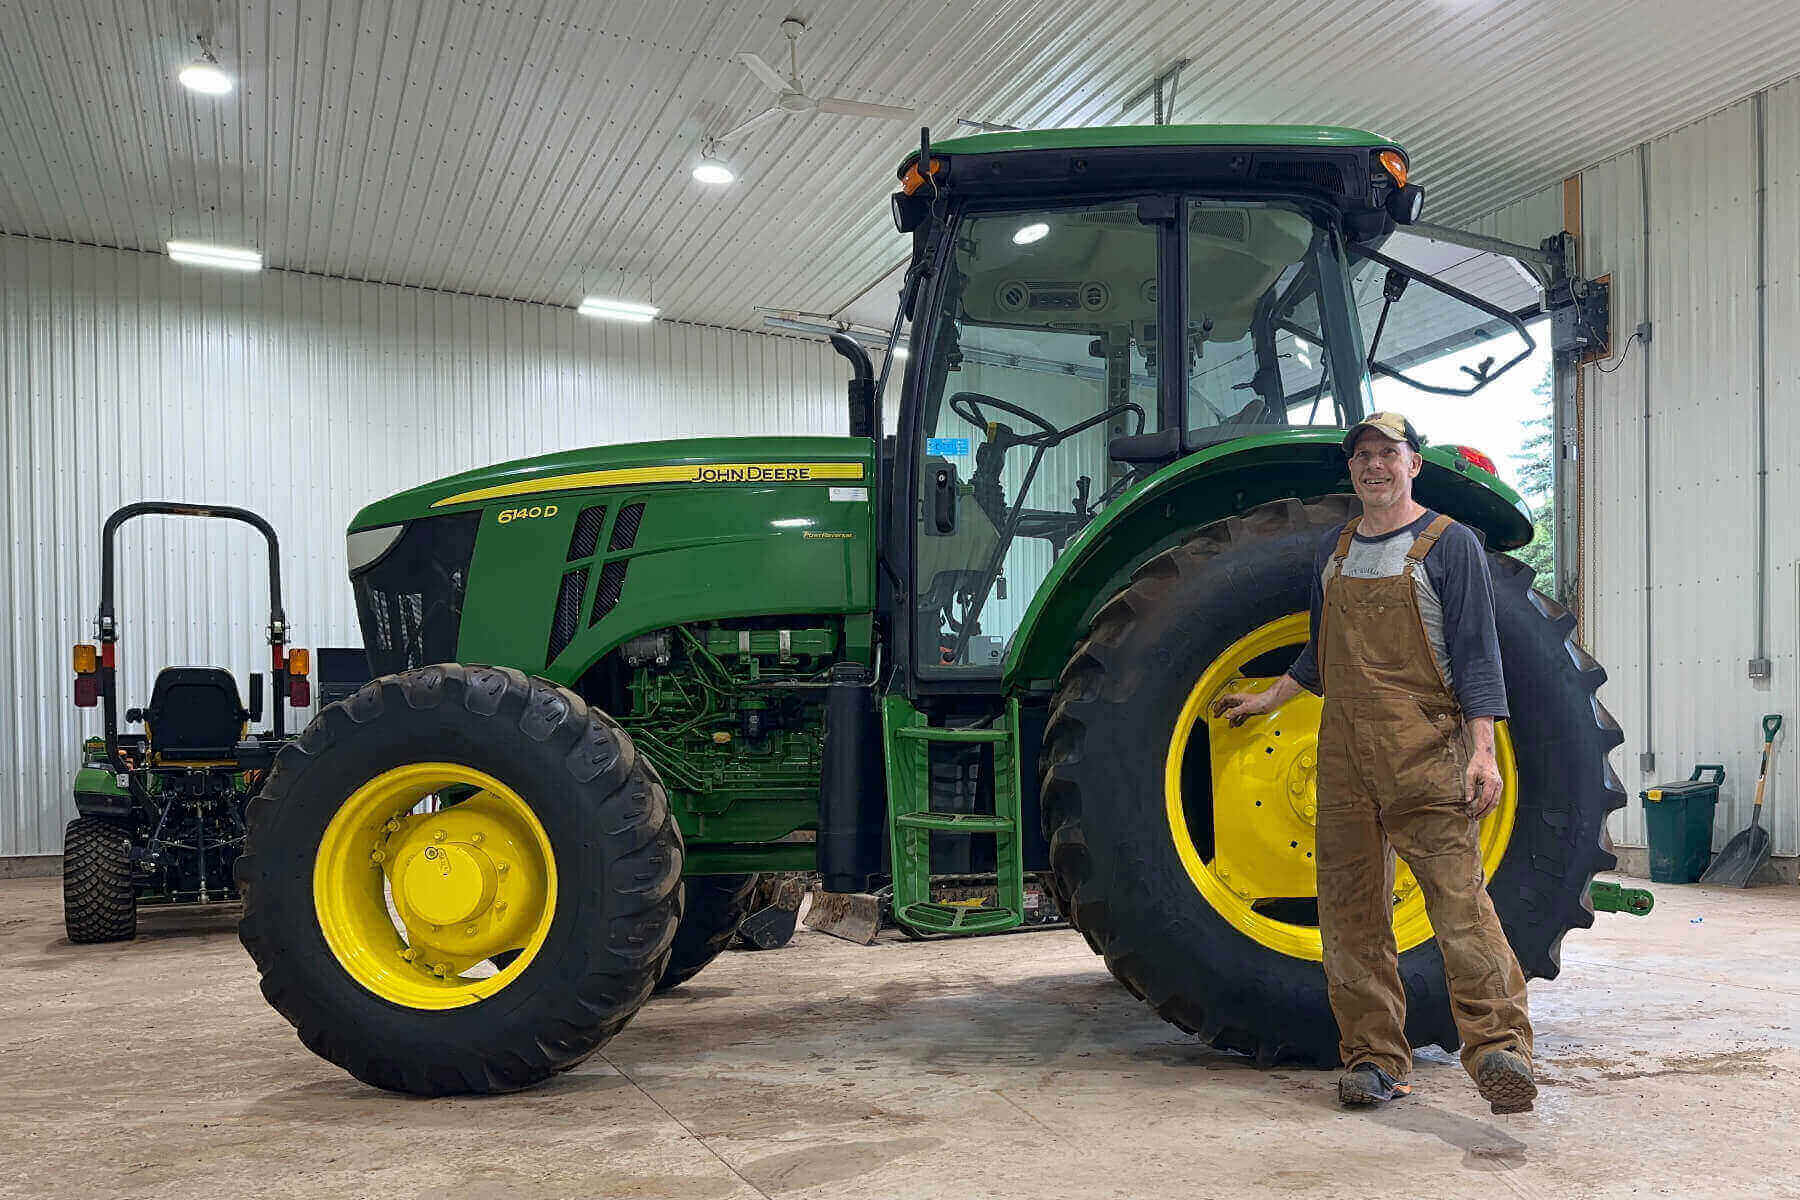 Jeff Shiner, CEO of 1Password, standing in front of a tractor.